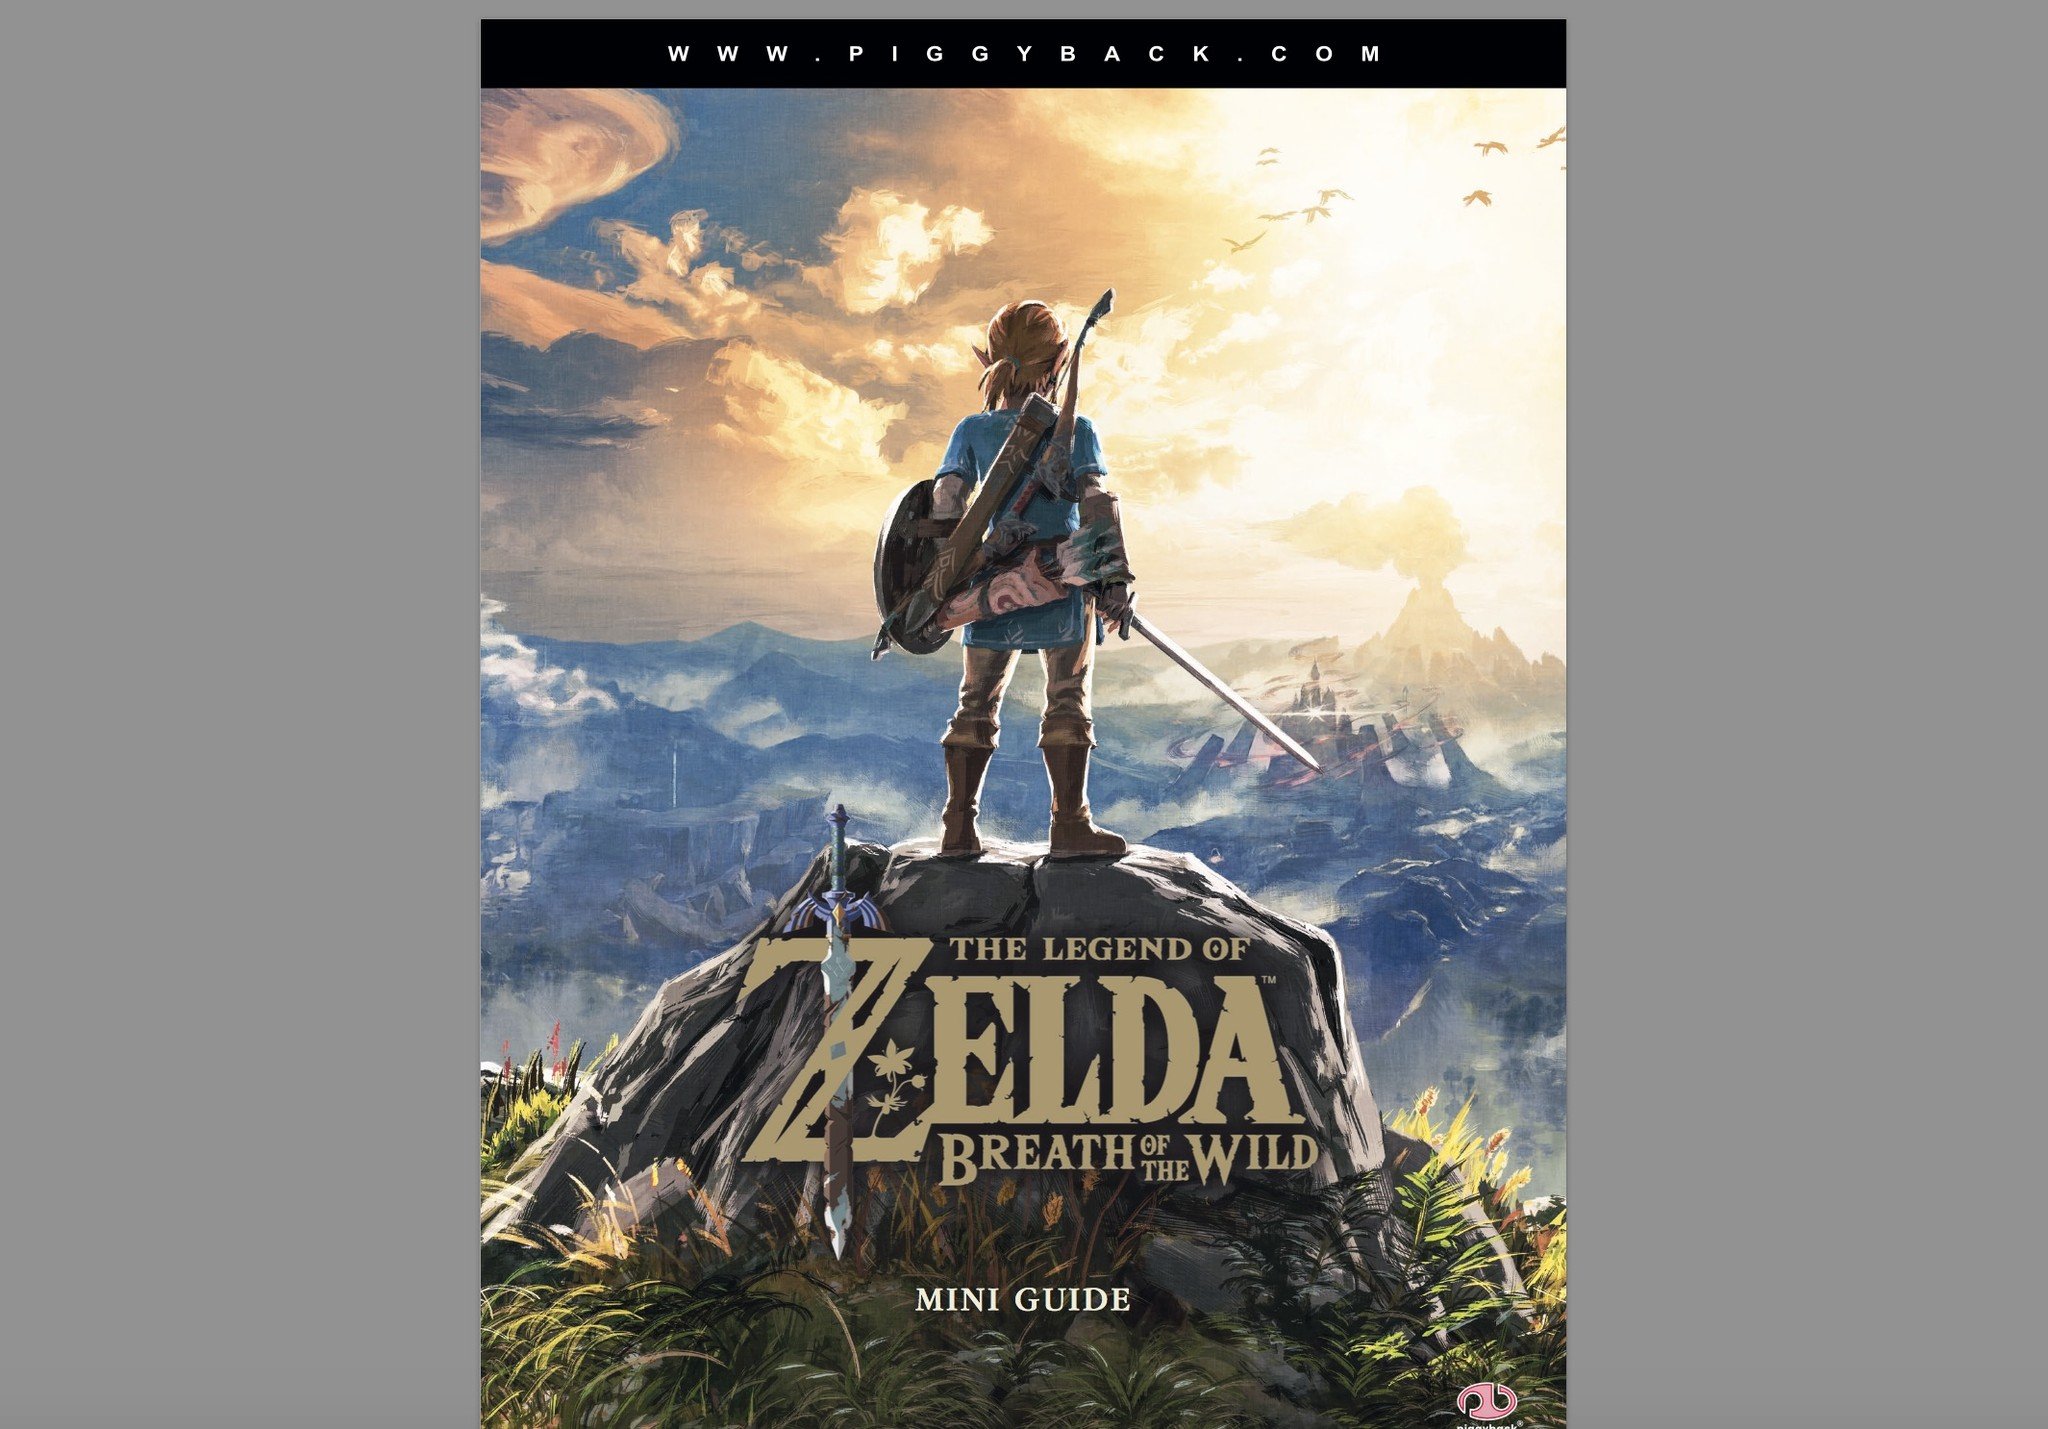 The Legend of Zelda: Breath of the Wild game guide